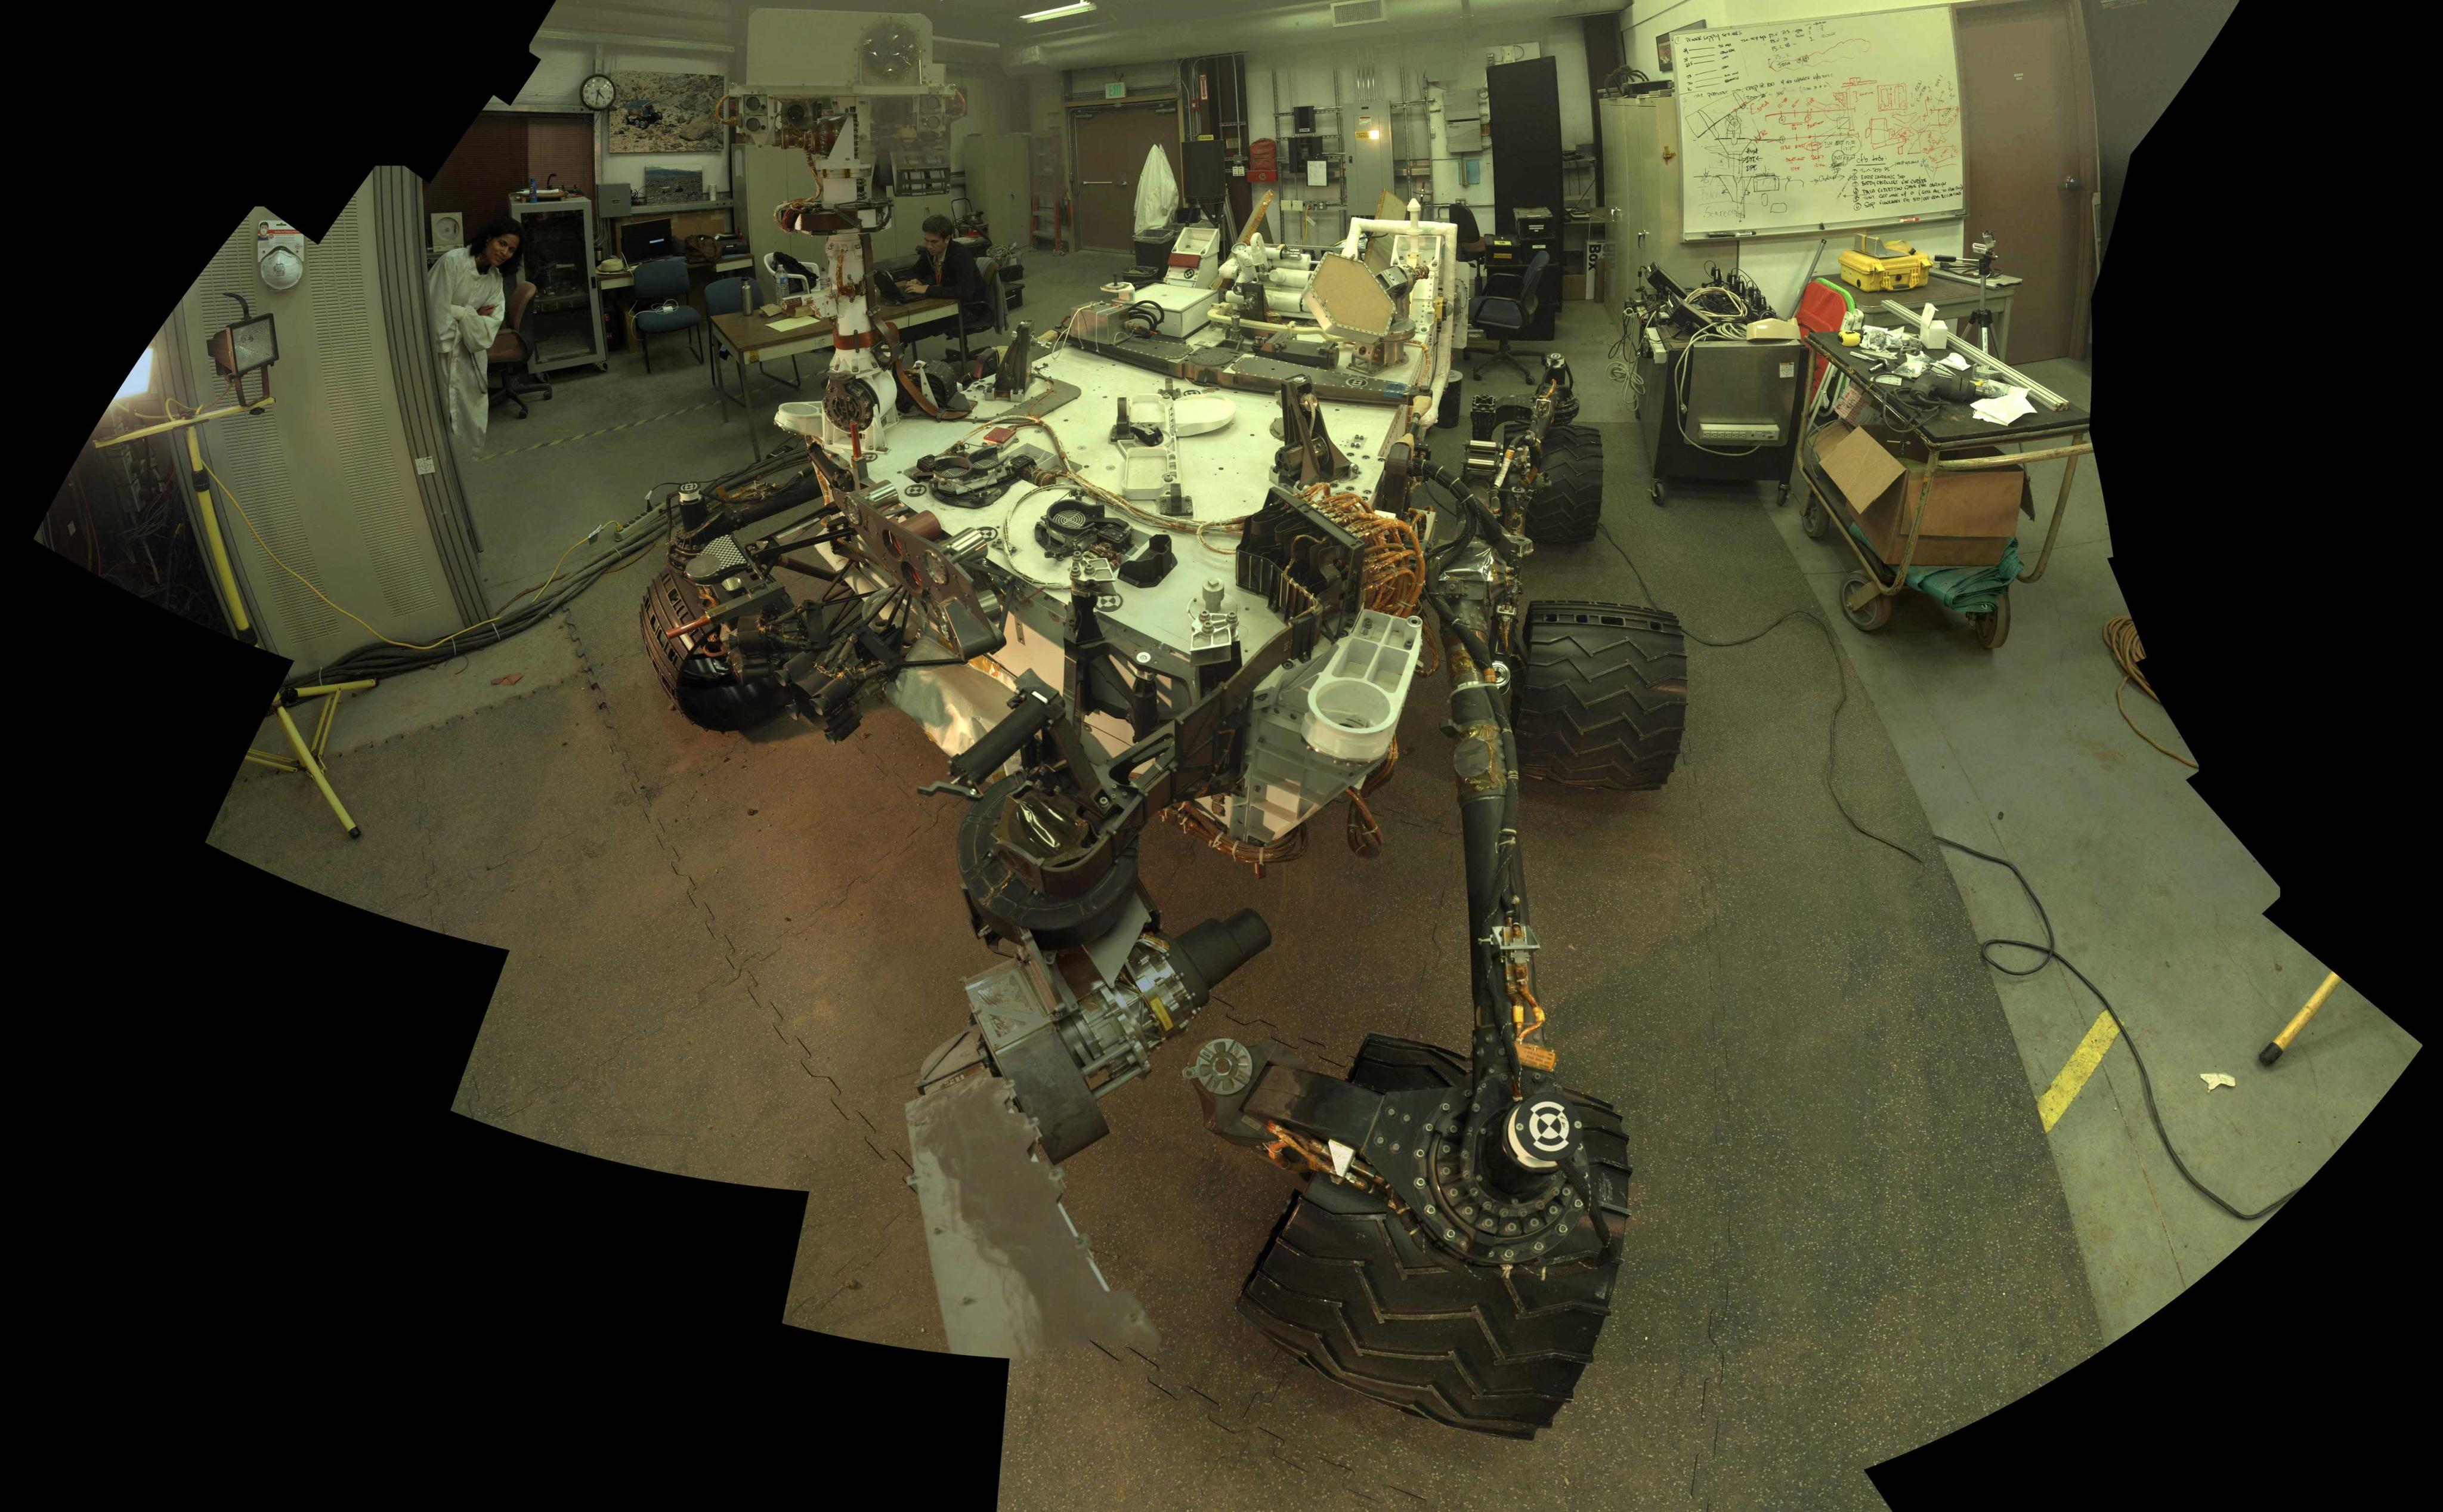 Camera and robotic-arm maneuvers for taking a self-portrait of the NASA Curiosity rover on Mars were checked first, at NASA's Jet Propulsion Laboratory in Pasadena, Calif., using the main test rover for the Curiosity.